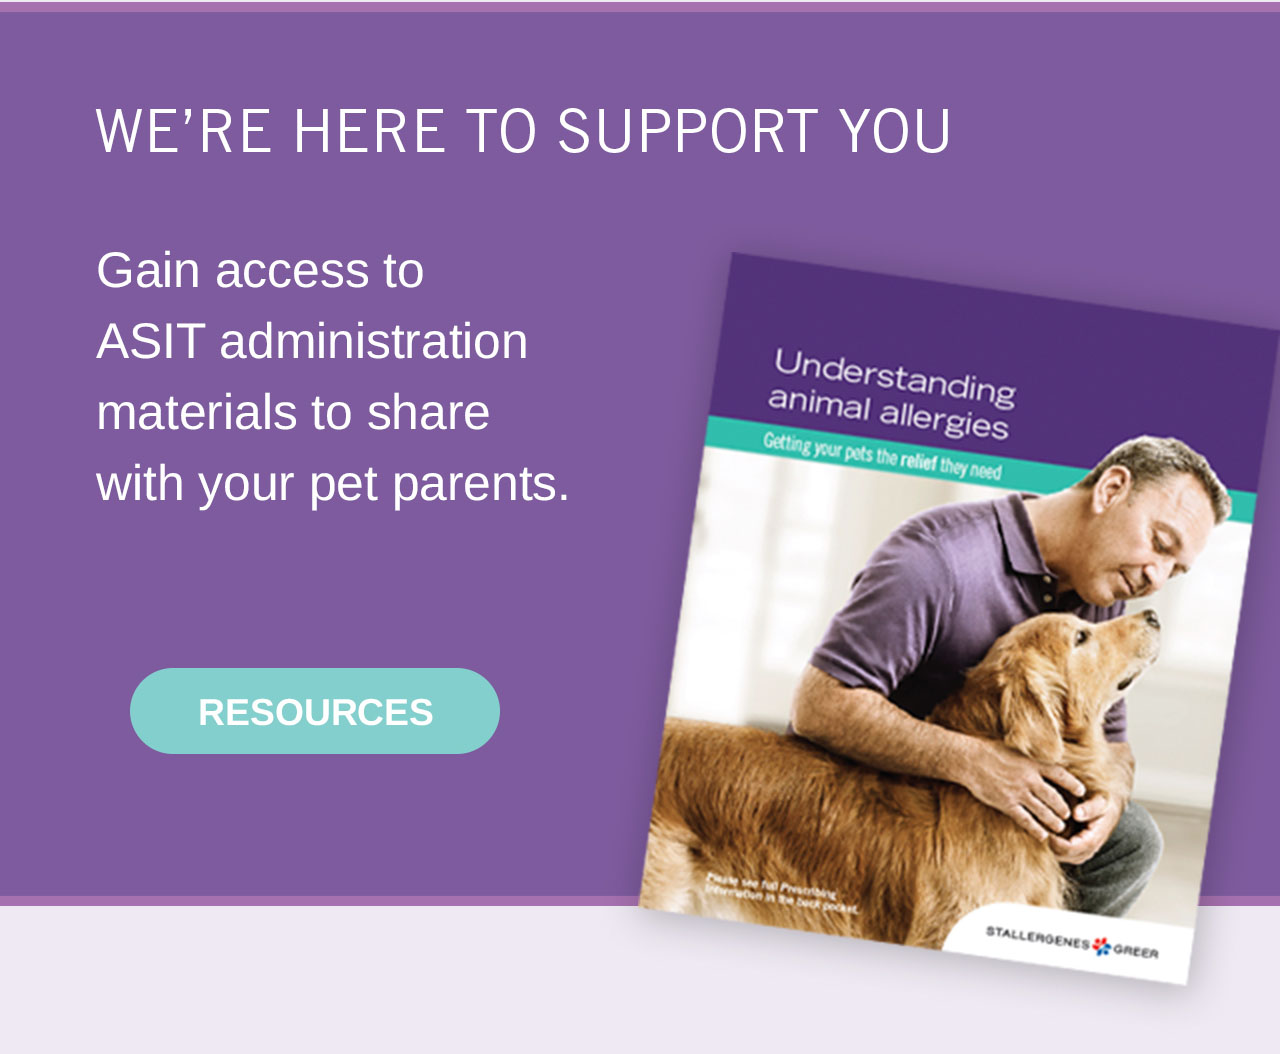 Where are here to support you - Gain access to ASIT administration materials to share with your pet parents.